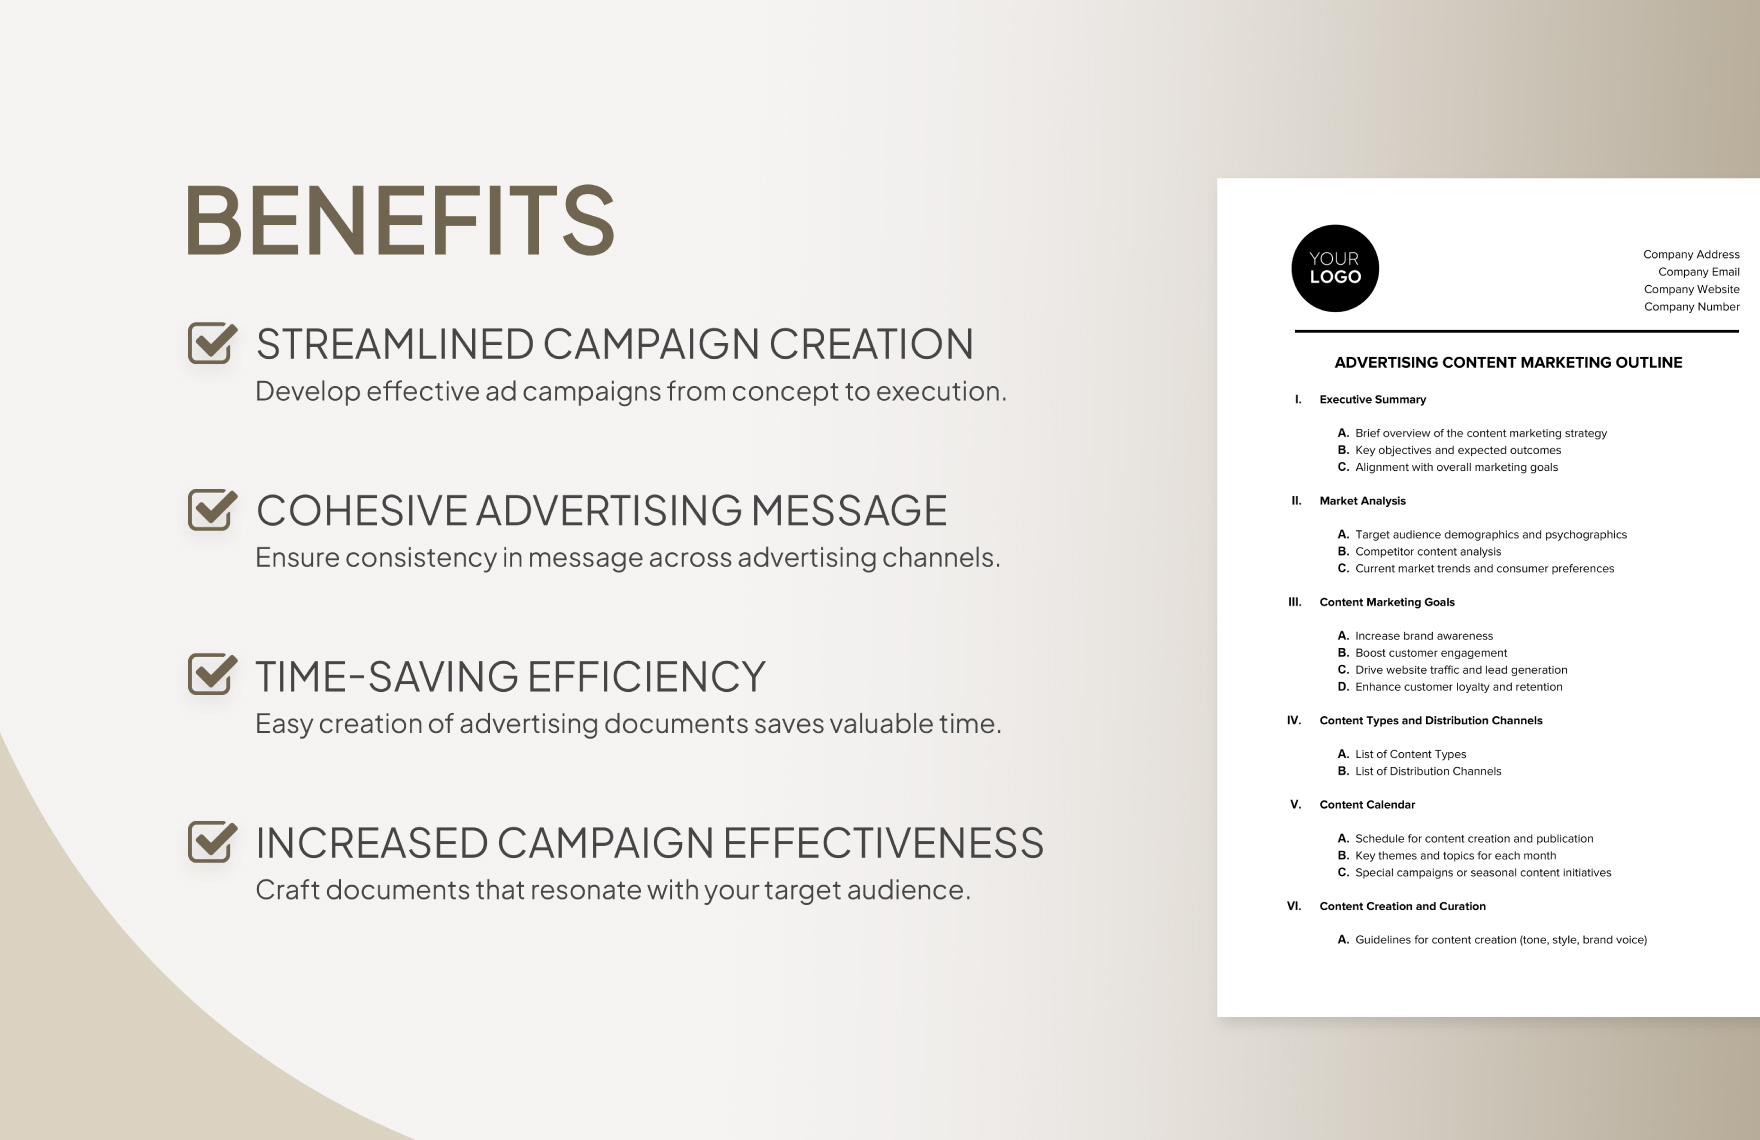 Advertising Content Marketing Outline Template